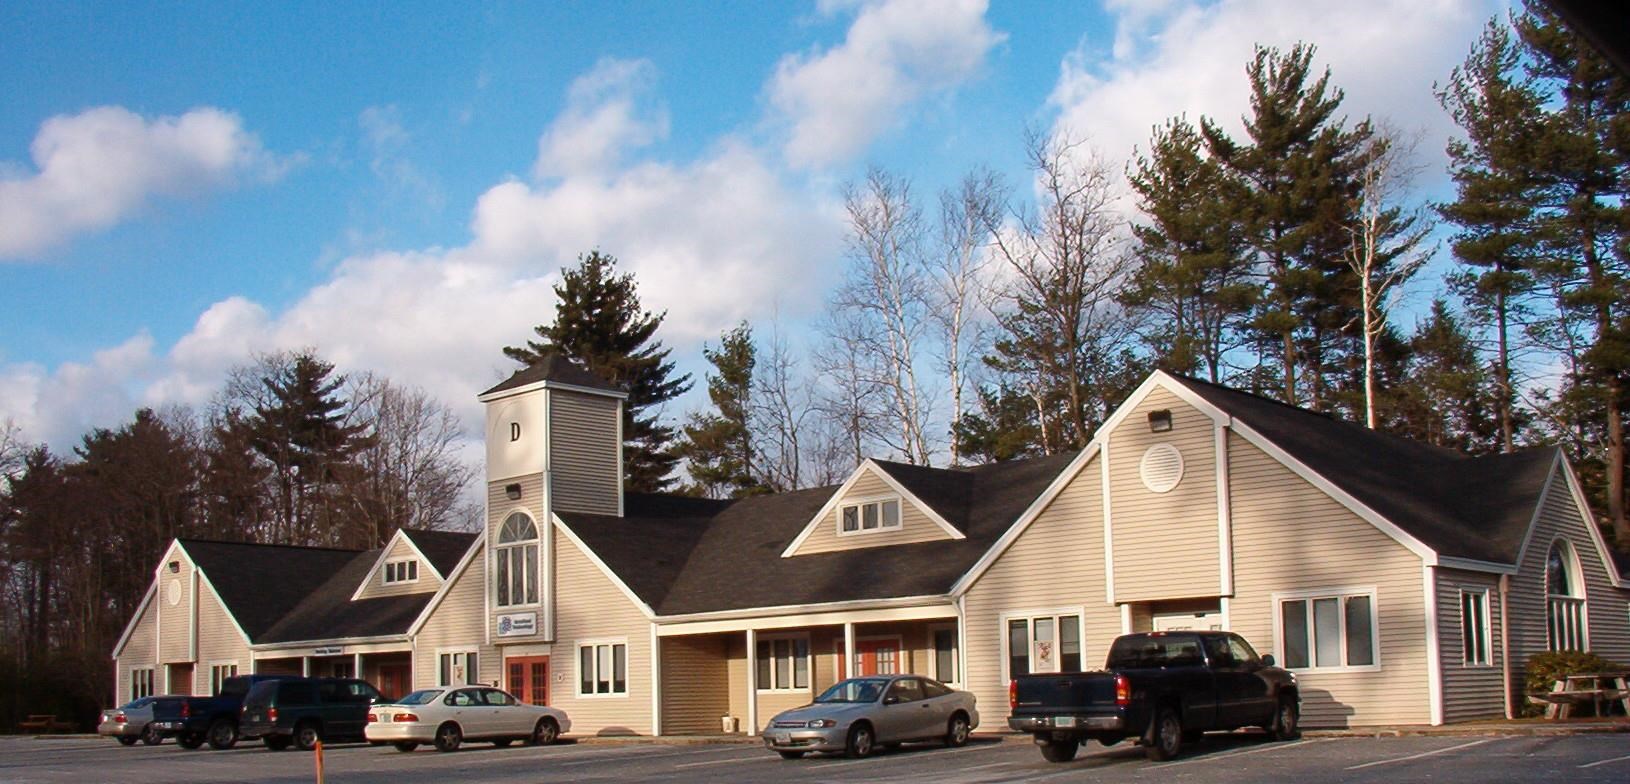 1D Commons Drive Unit 21 & 22 (OL-739), Londonderry, NH 03053